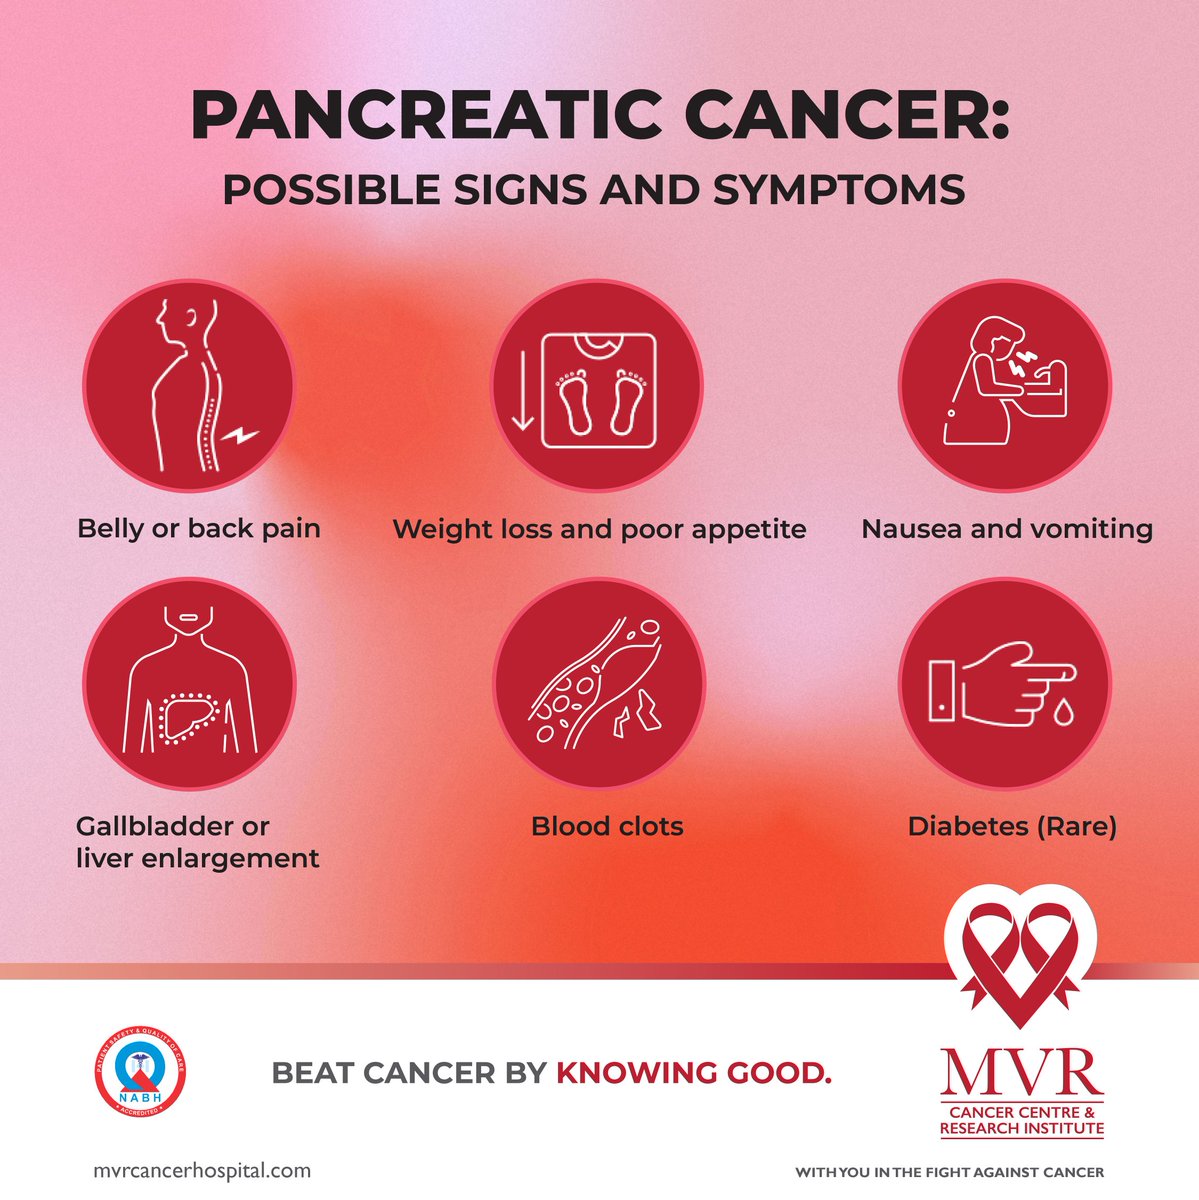 During this Pancreatic Cancer Awareness month, its a good reminder  to learn about the signs and symptoms of Pancreatic Cancer.
.
.
.
#pancreaticcancerawareness #pancreaticcancersymptoms #cancer #itsallabouttime